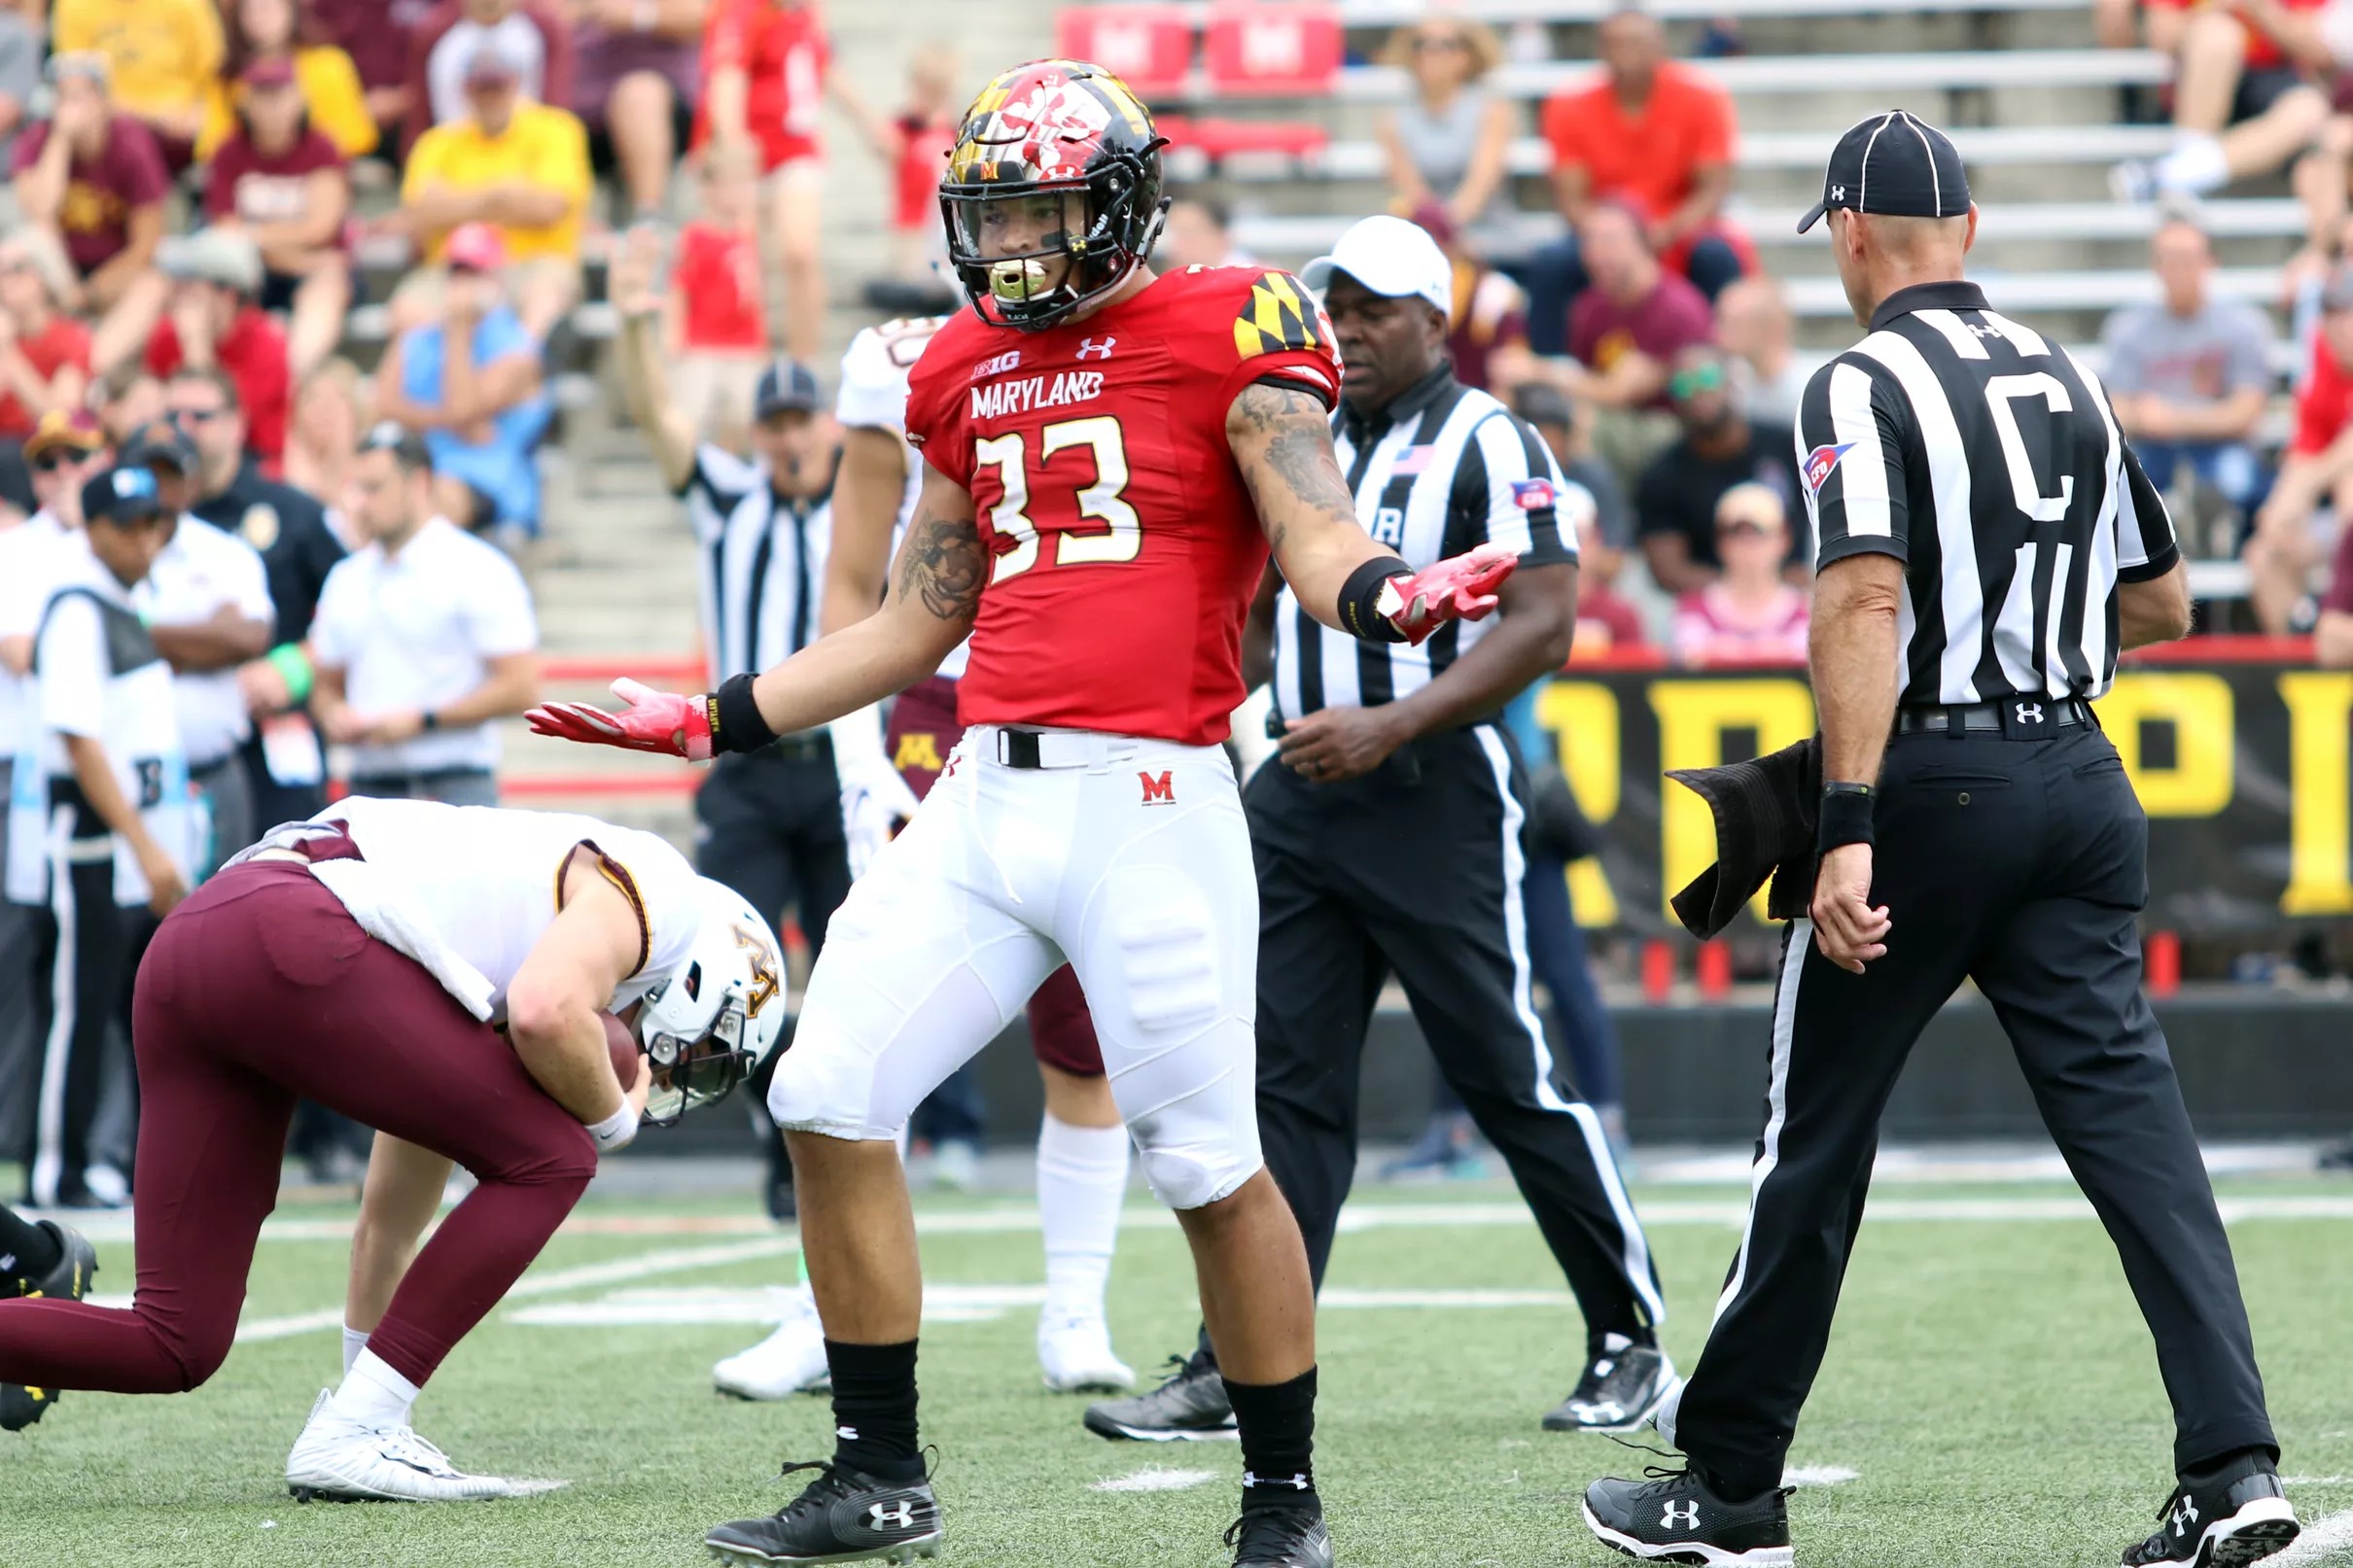 Maryland LB Tre Watson signs with Washington Redskins as undrafted free